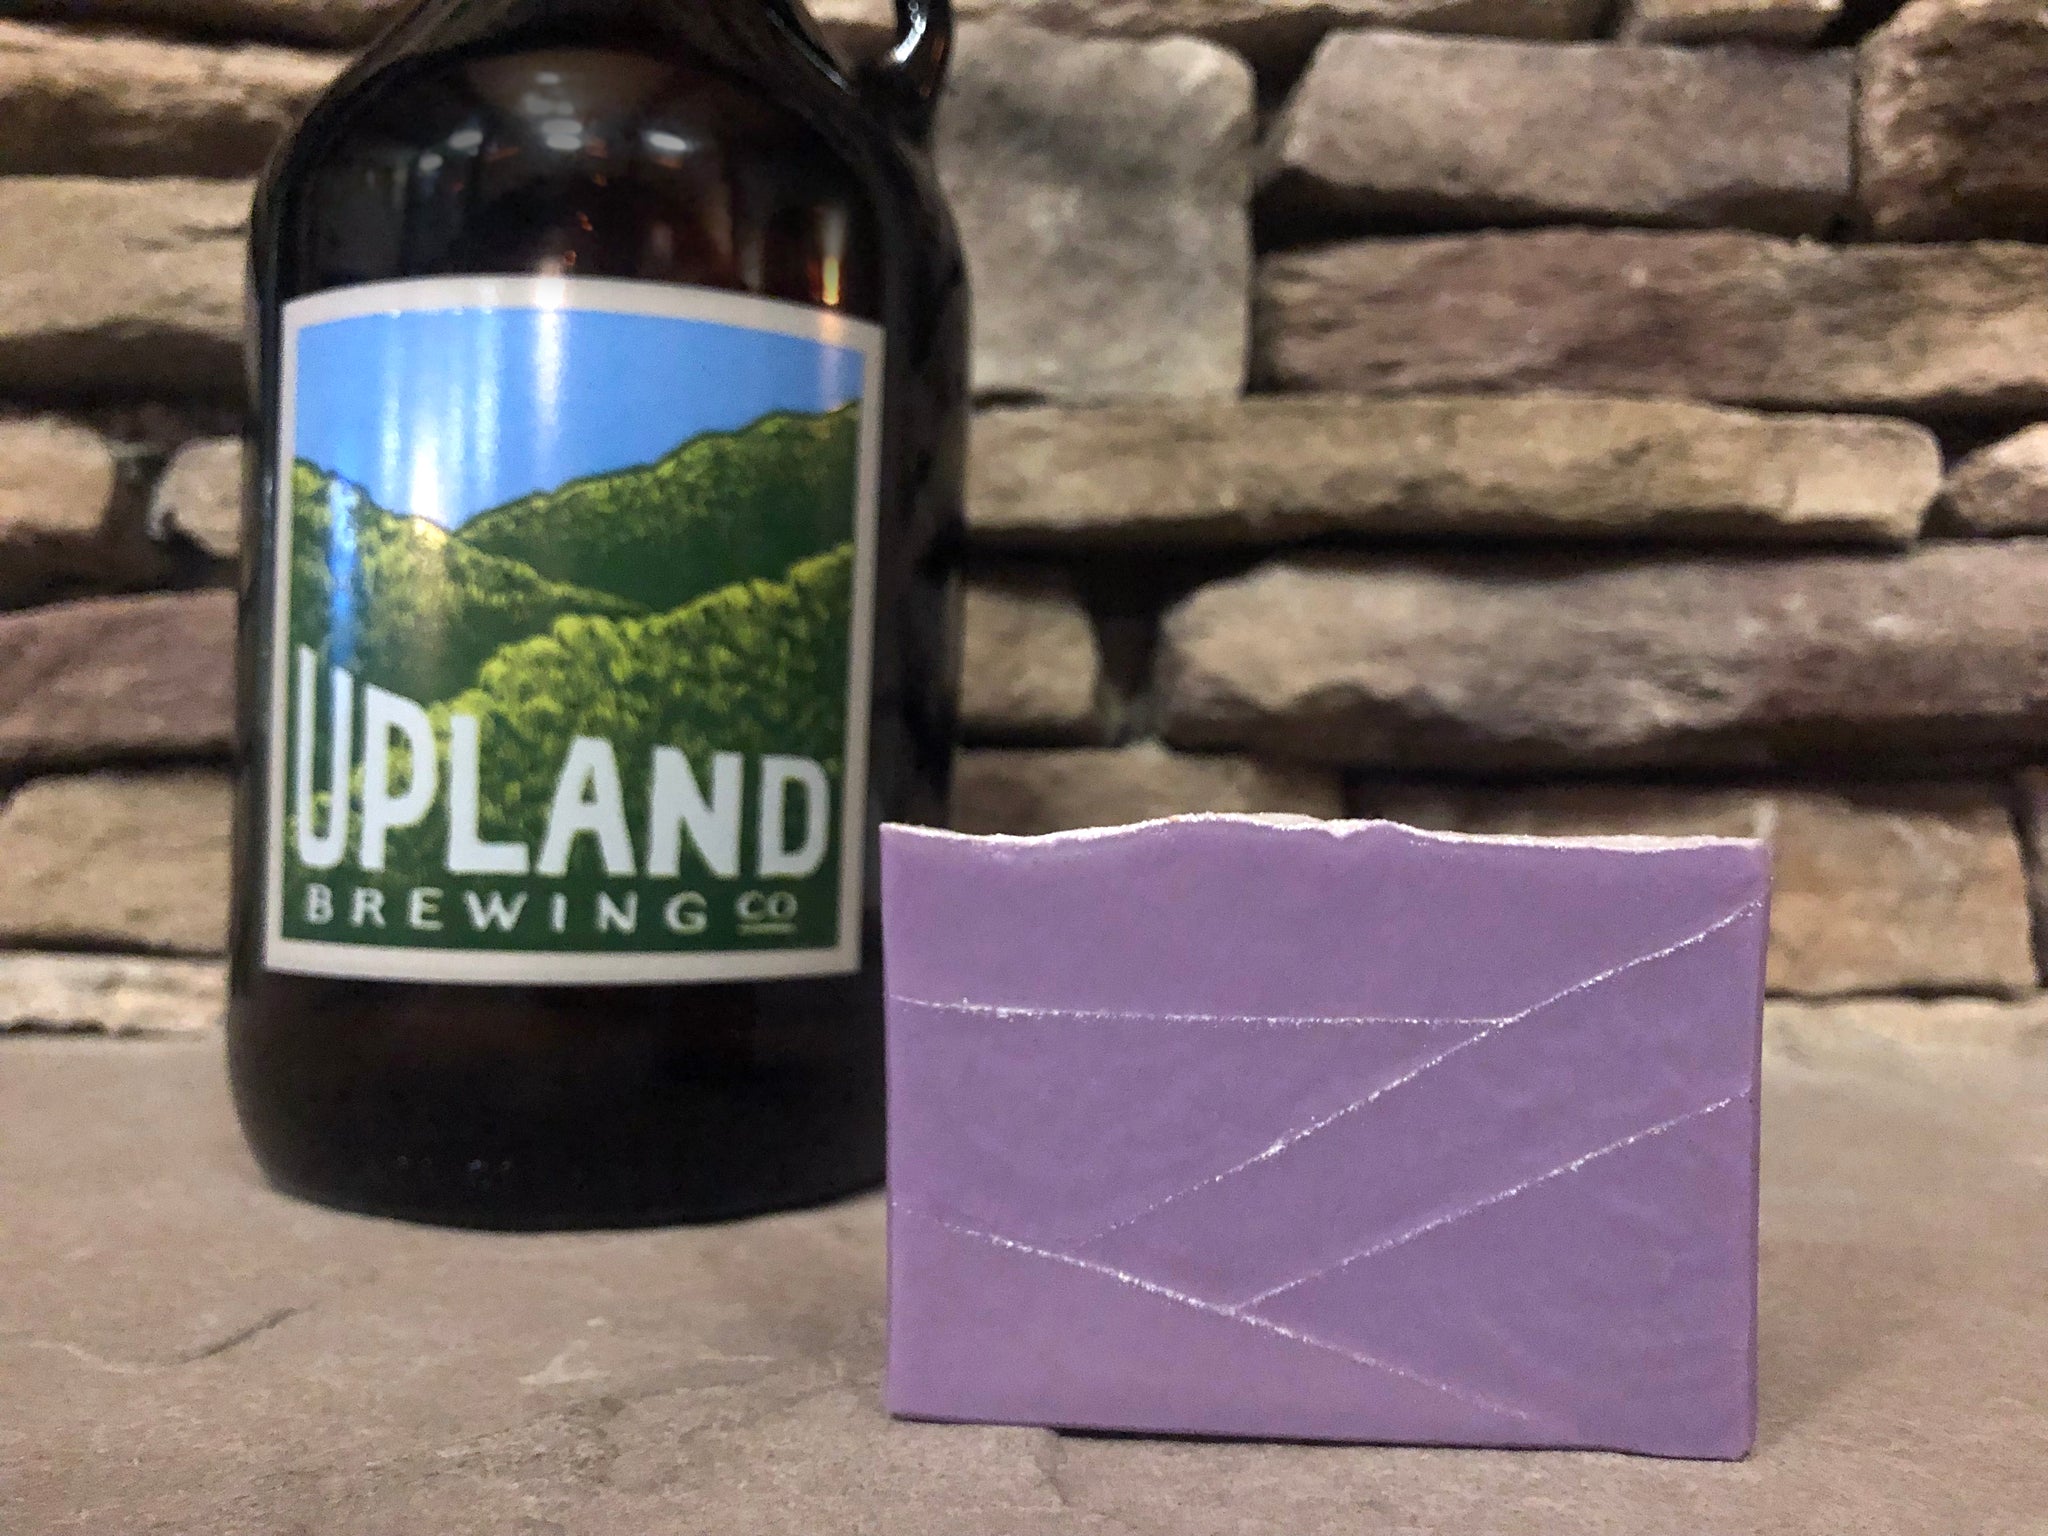 purple beer soap for her handmade in Indiana with dragonfly ipa Indiana craft beer from upland brewing co. Bloomington Indiana craft brewery  dragonfly India pale ale craft beer purple soap with silver accents purple beer soap for her spunkndisorderly craft beer soaps